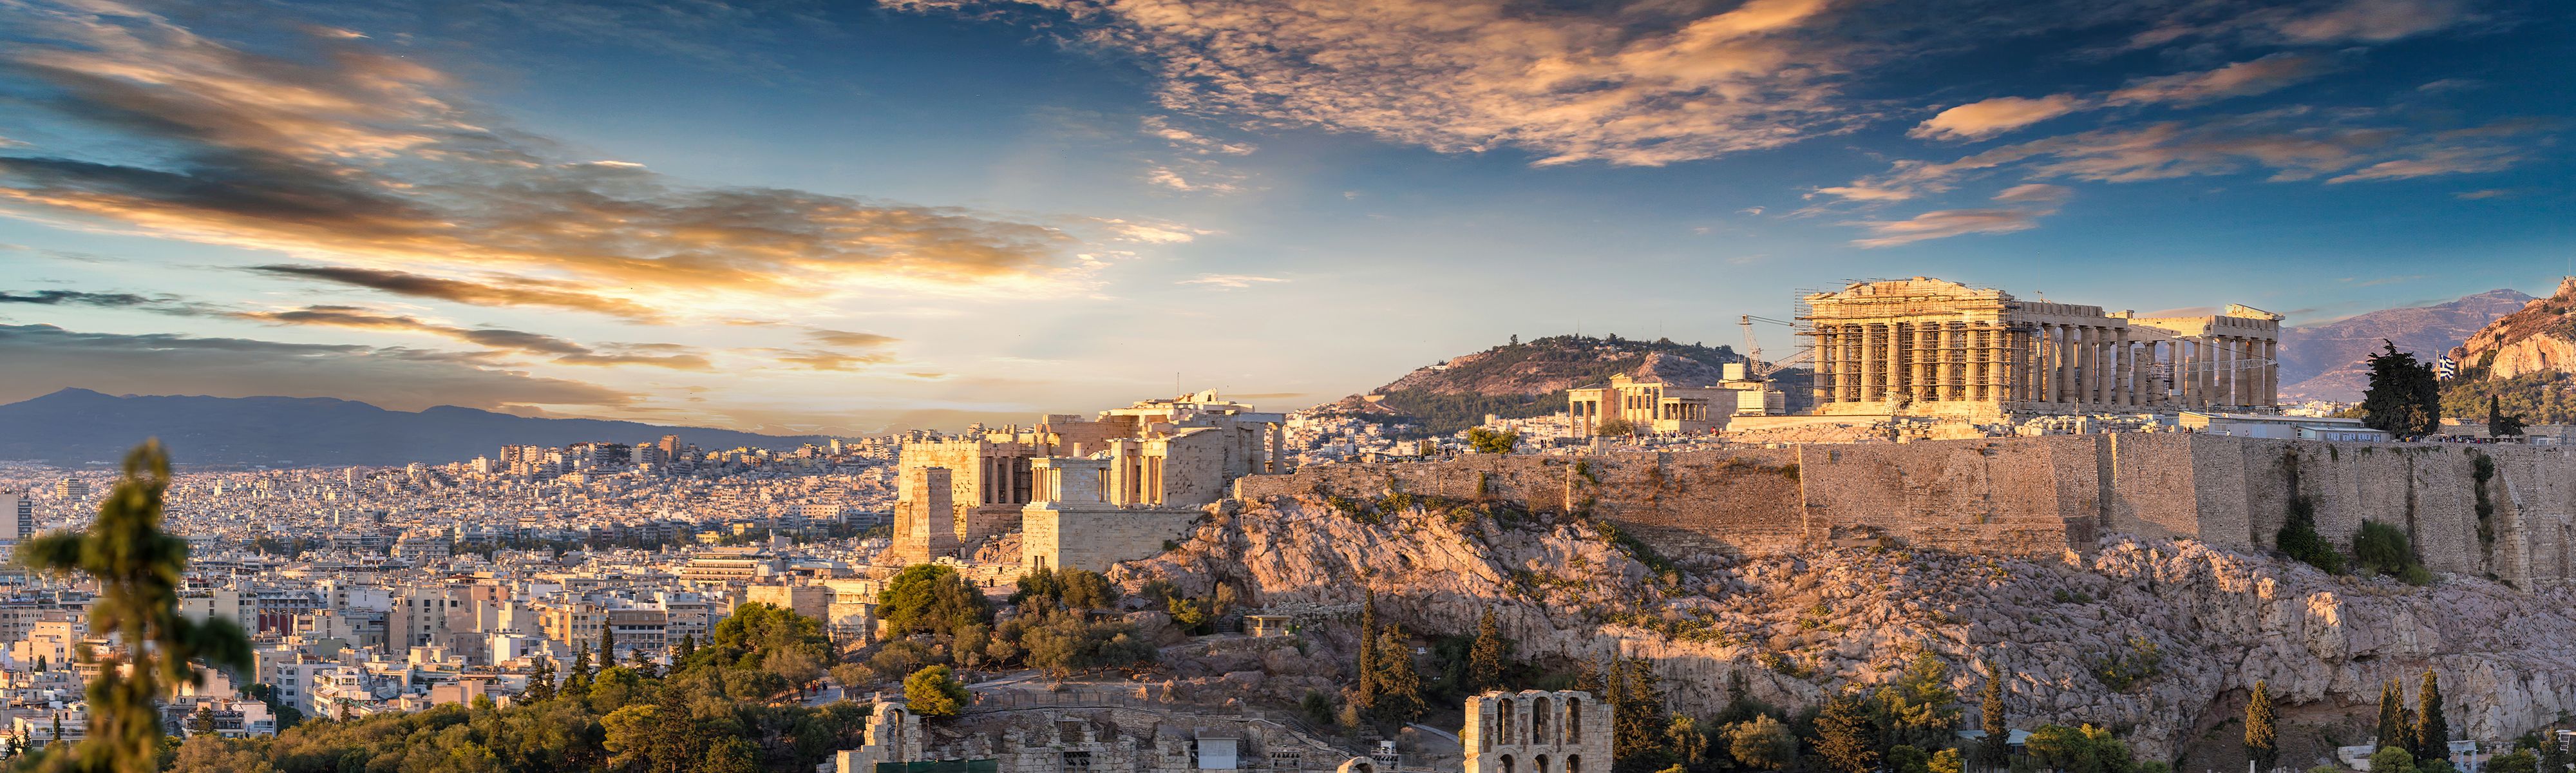 panorama of the acropolis on top of the wall in athens greece